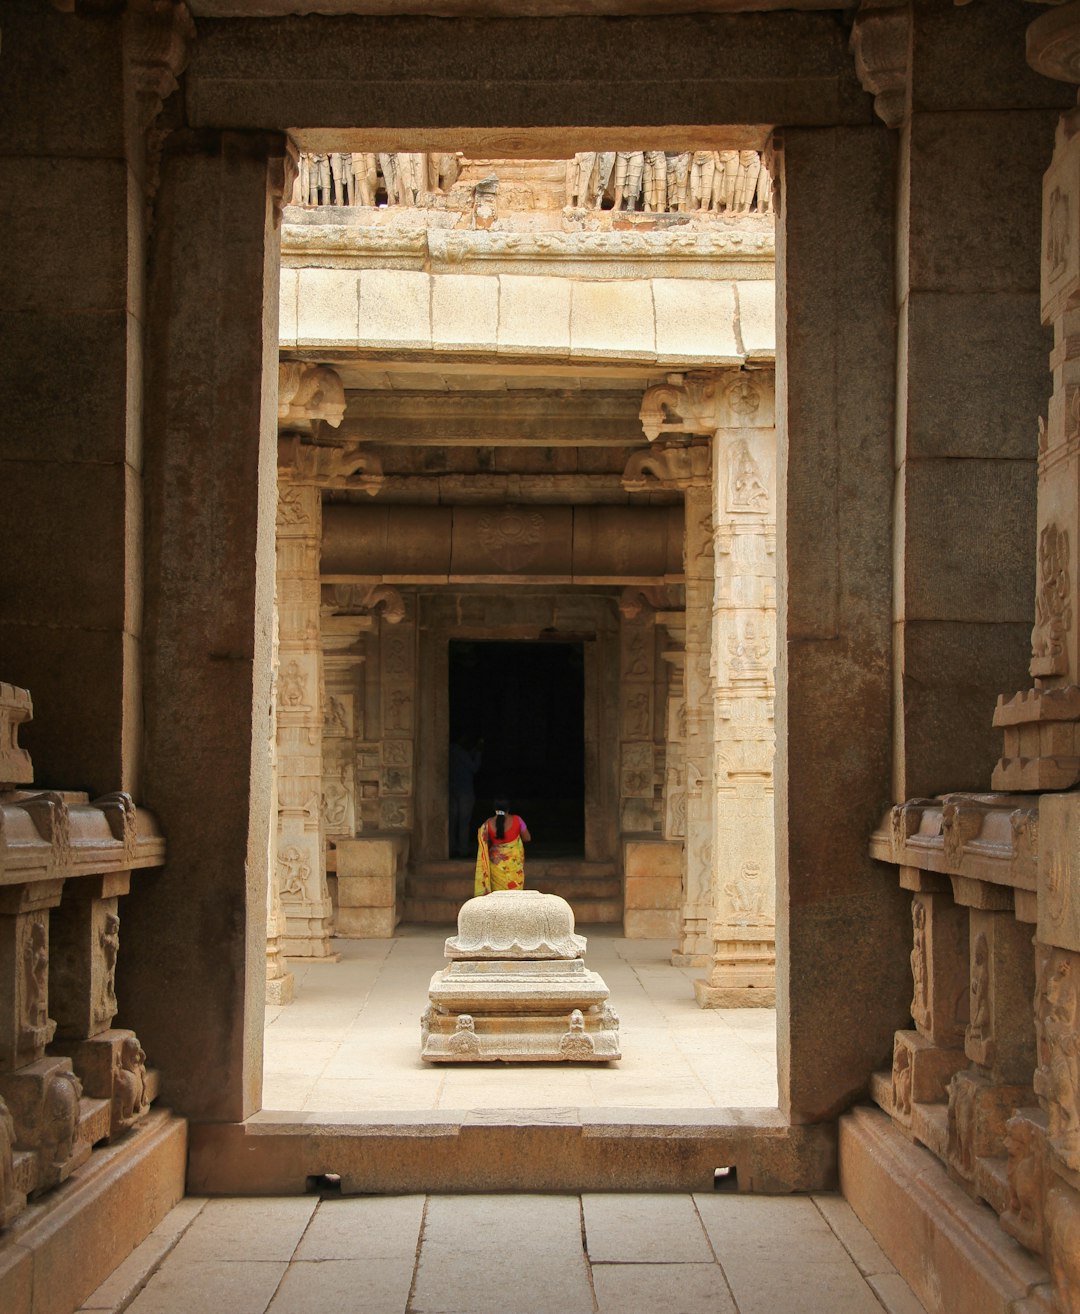 Travel Tips and Stories of Hampi Archeological Ruins in India